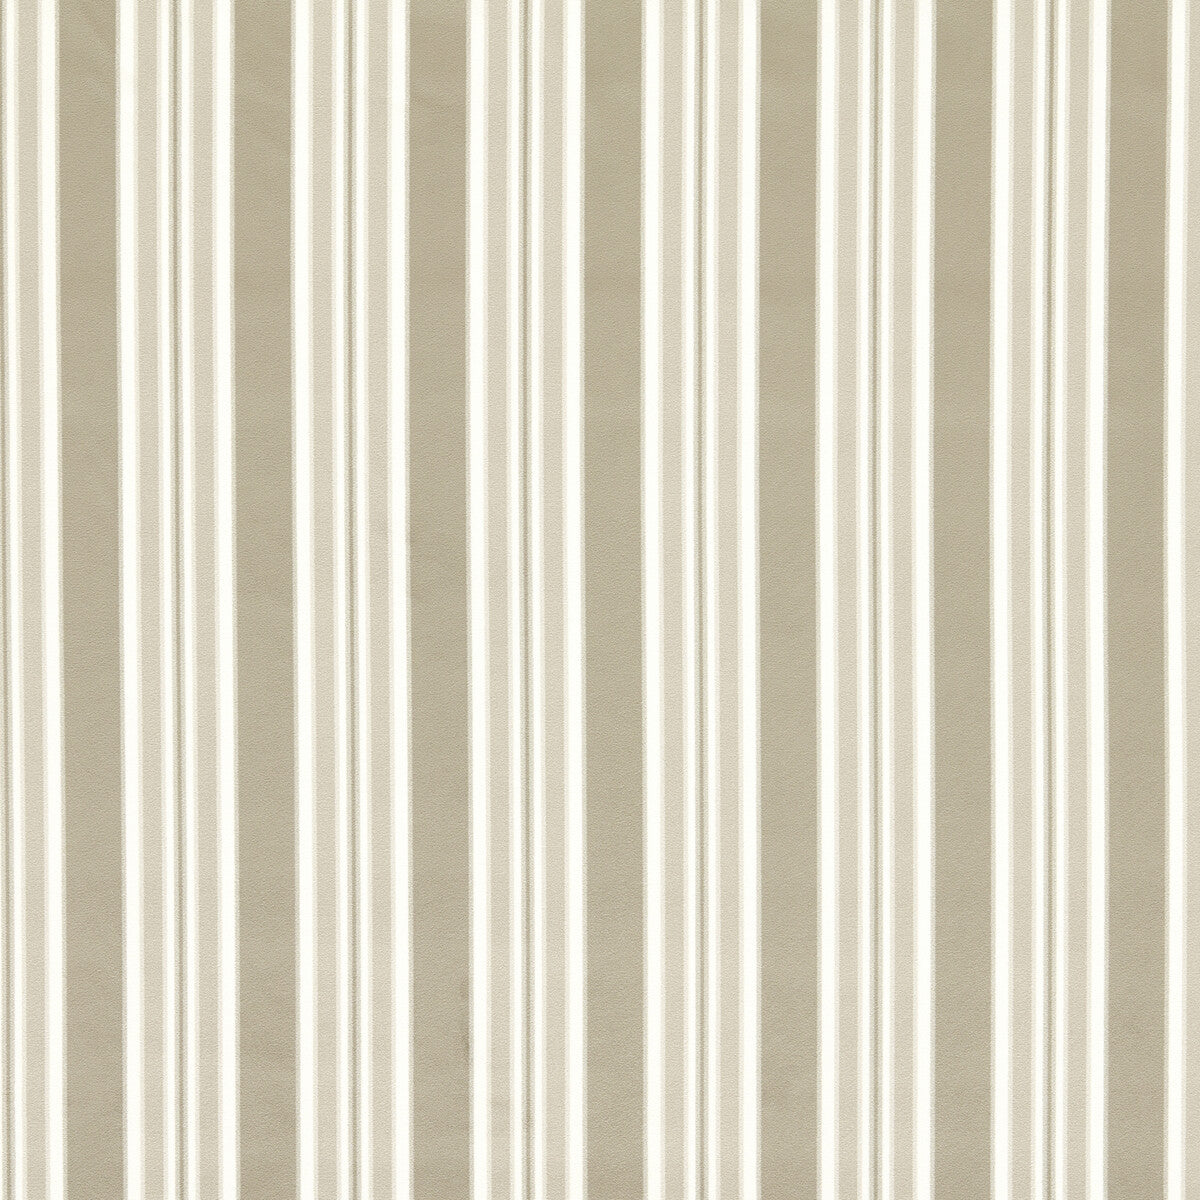 Wilmott fabric in antique color - pattern F1691/01.CAC.0 - by Clarke And Clarke in the Whitworth collection